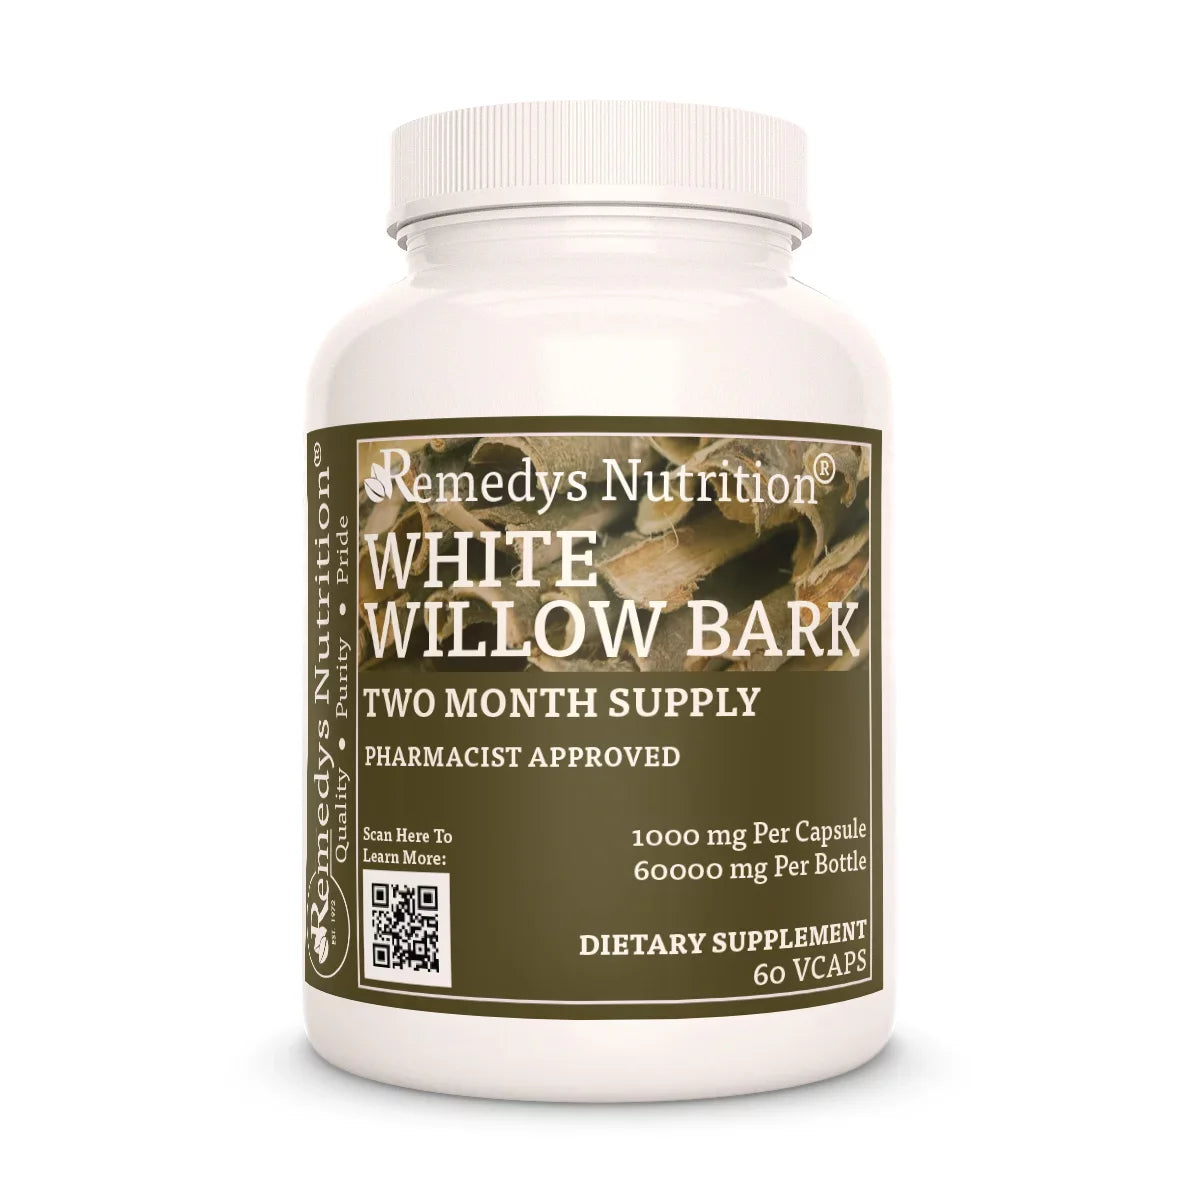 Image of Remedy's Nutrition® White Willow Bark Capsules Herbal Dietary Supplement front bottle. Made in the USA. Salix alba